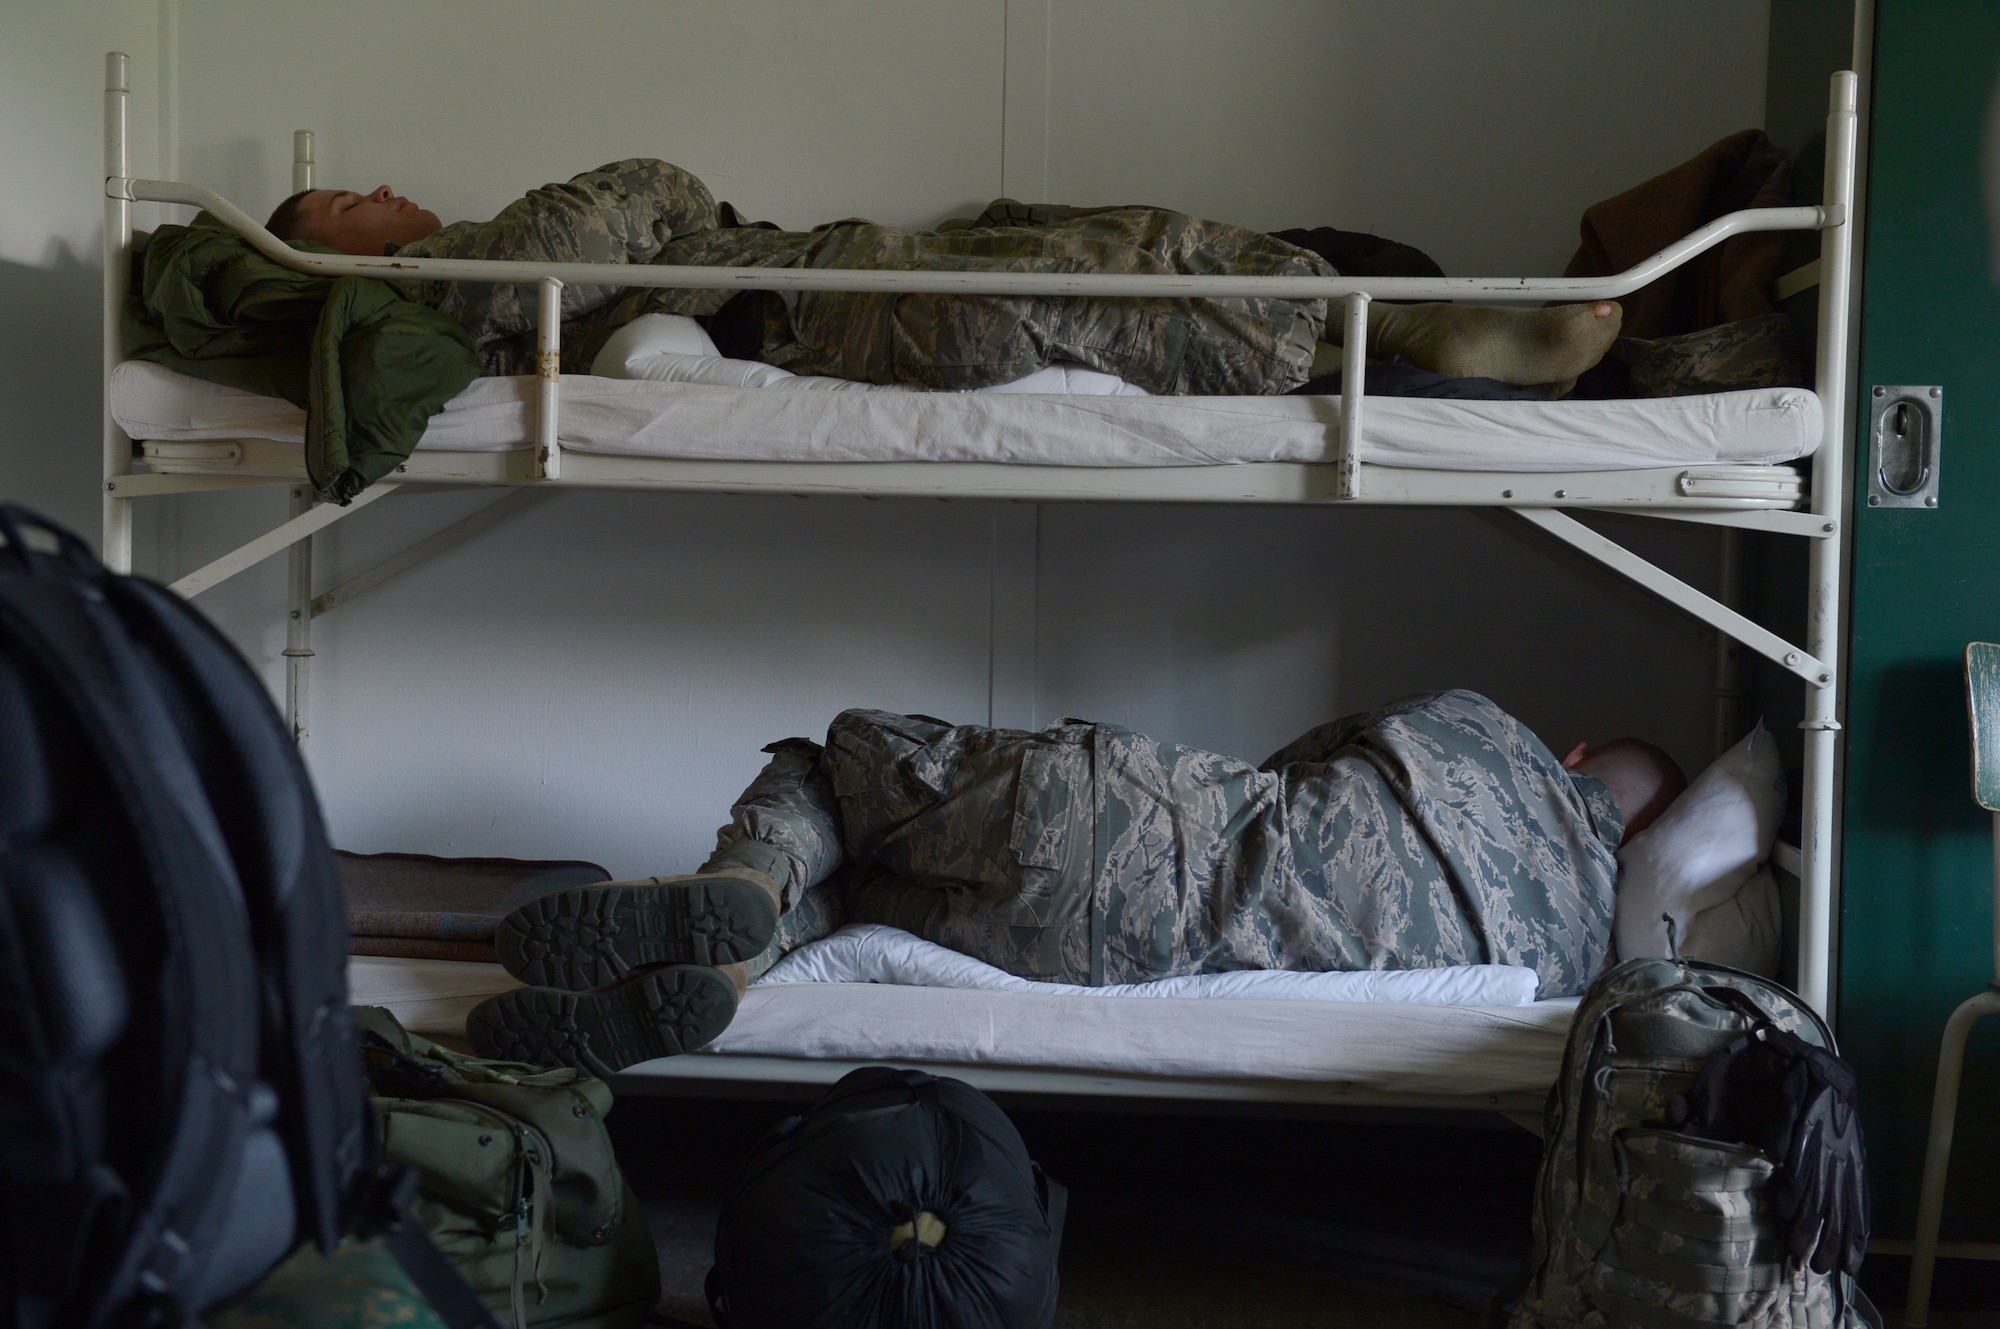 U.S. Air Force Airmen sleep at a Bundeswehr Army Post, Schwarzenborn, Germany, while they wait for convoy vehicle repairs from Spangdahlem Air Base, Germany, June 3, 2014. Airmen from the 606th Air Control Squadron convoyed to Poland to support NATO air assets from the United Kingdom, France, U.S. and Poland with ground-to-air communications during two military exercises. (U.S. Air Force photo by Airman 1st Class Kyle Gese/Released)